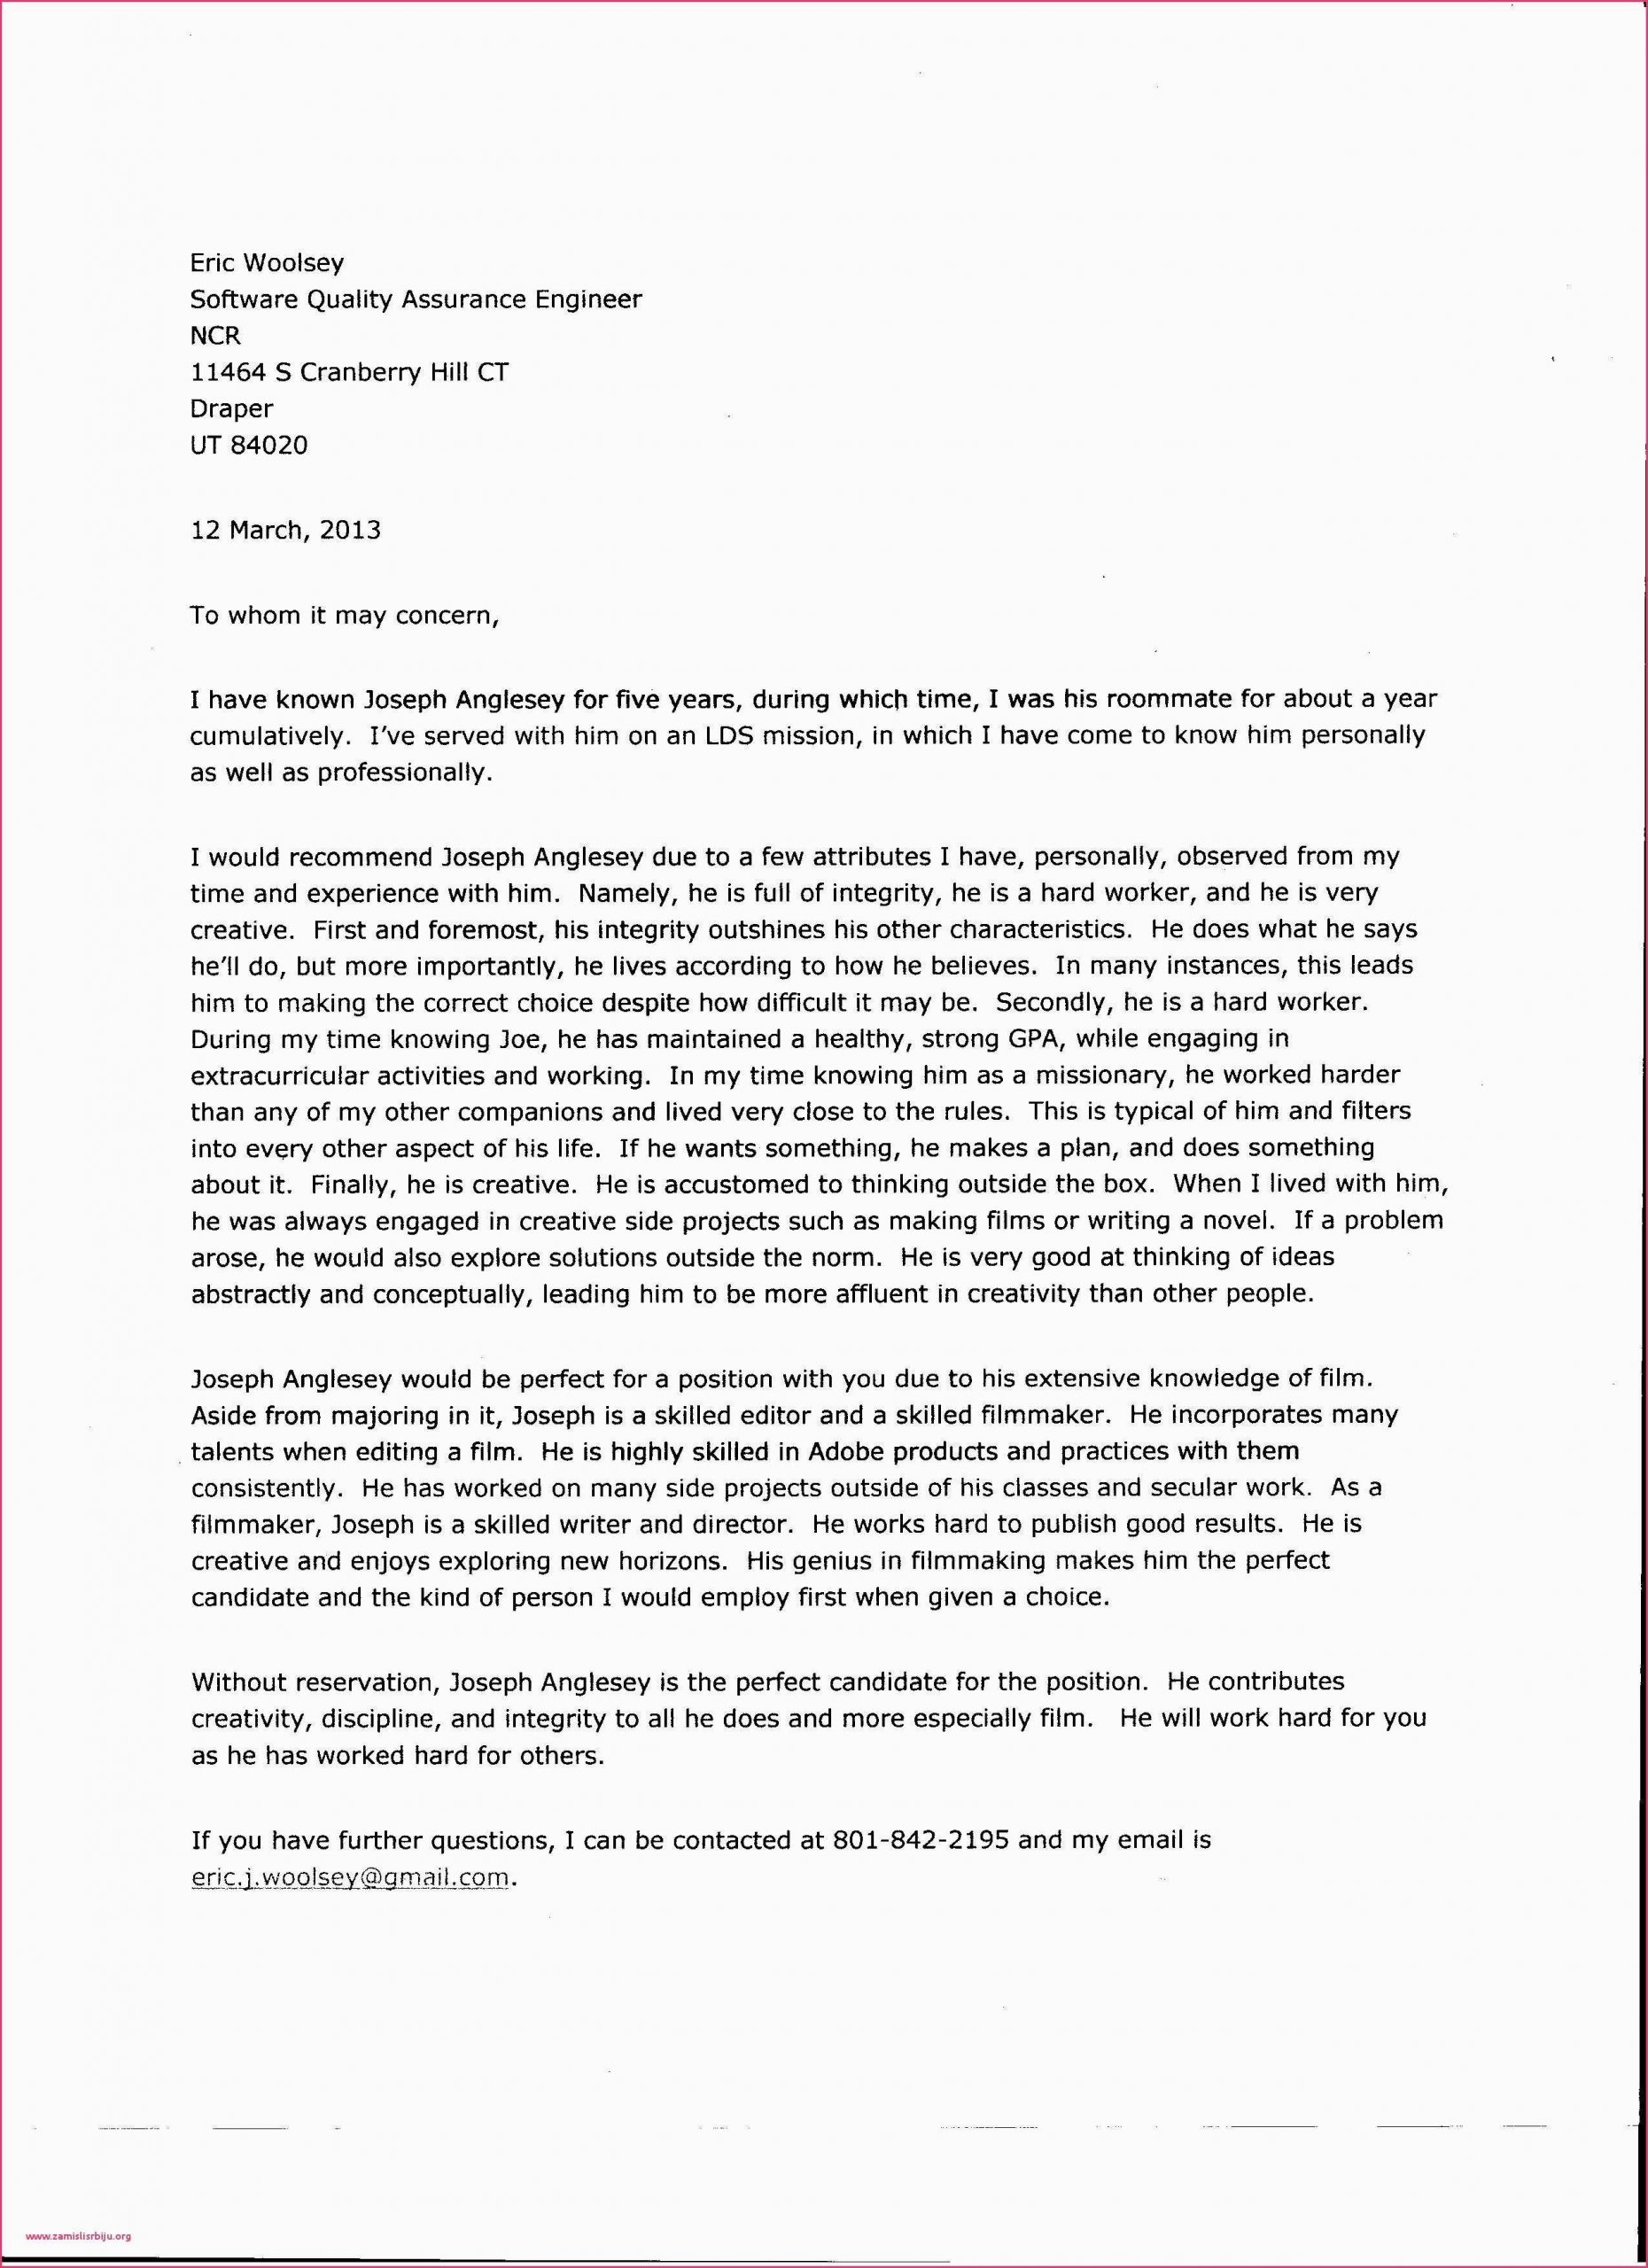 Child Custody Letter Of Recommendation Beautiful Character pertaining to size 2550 X 3510